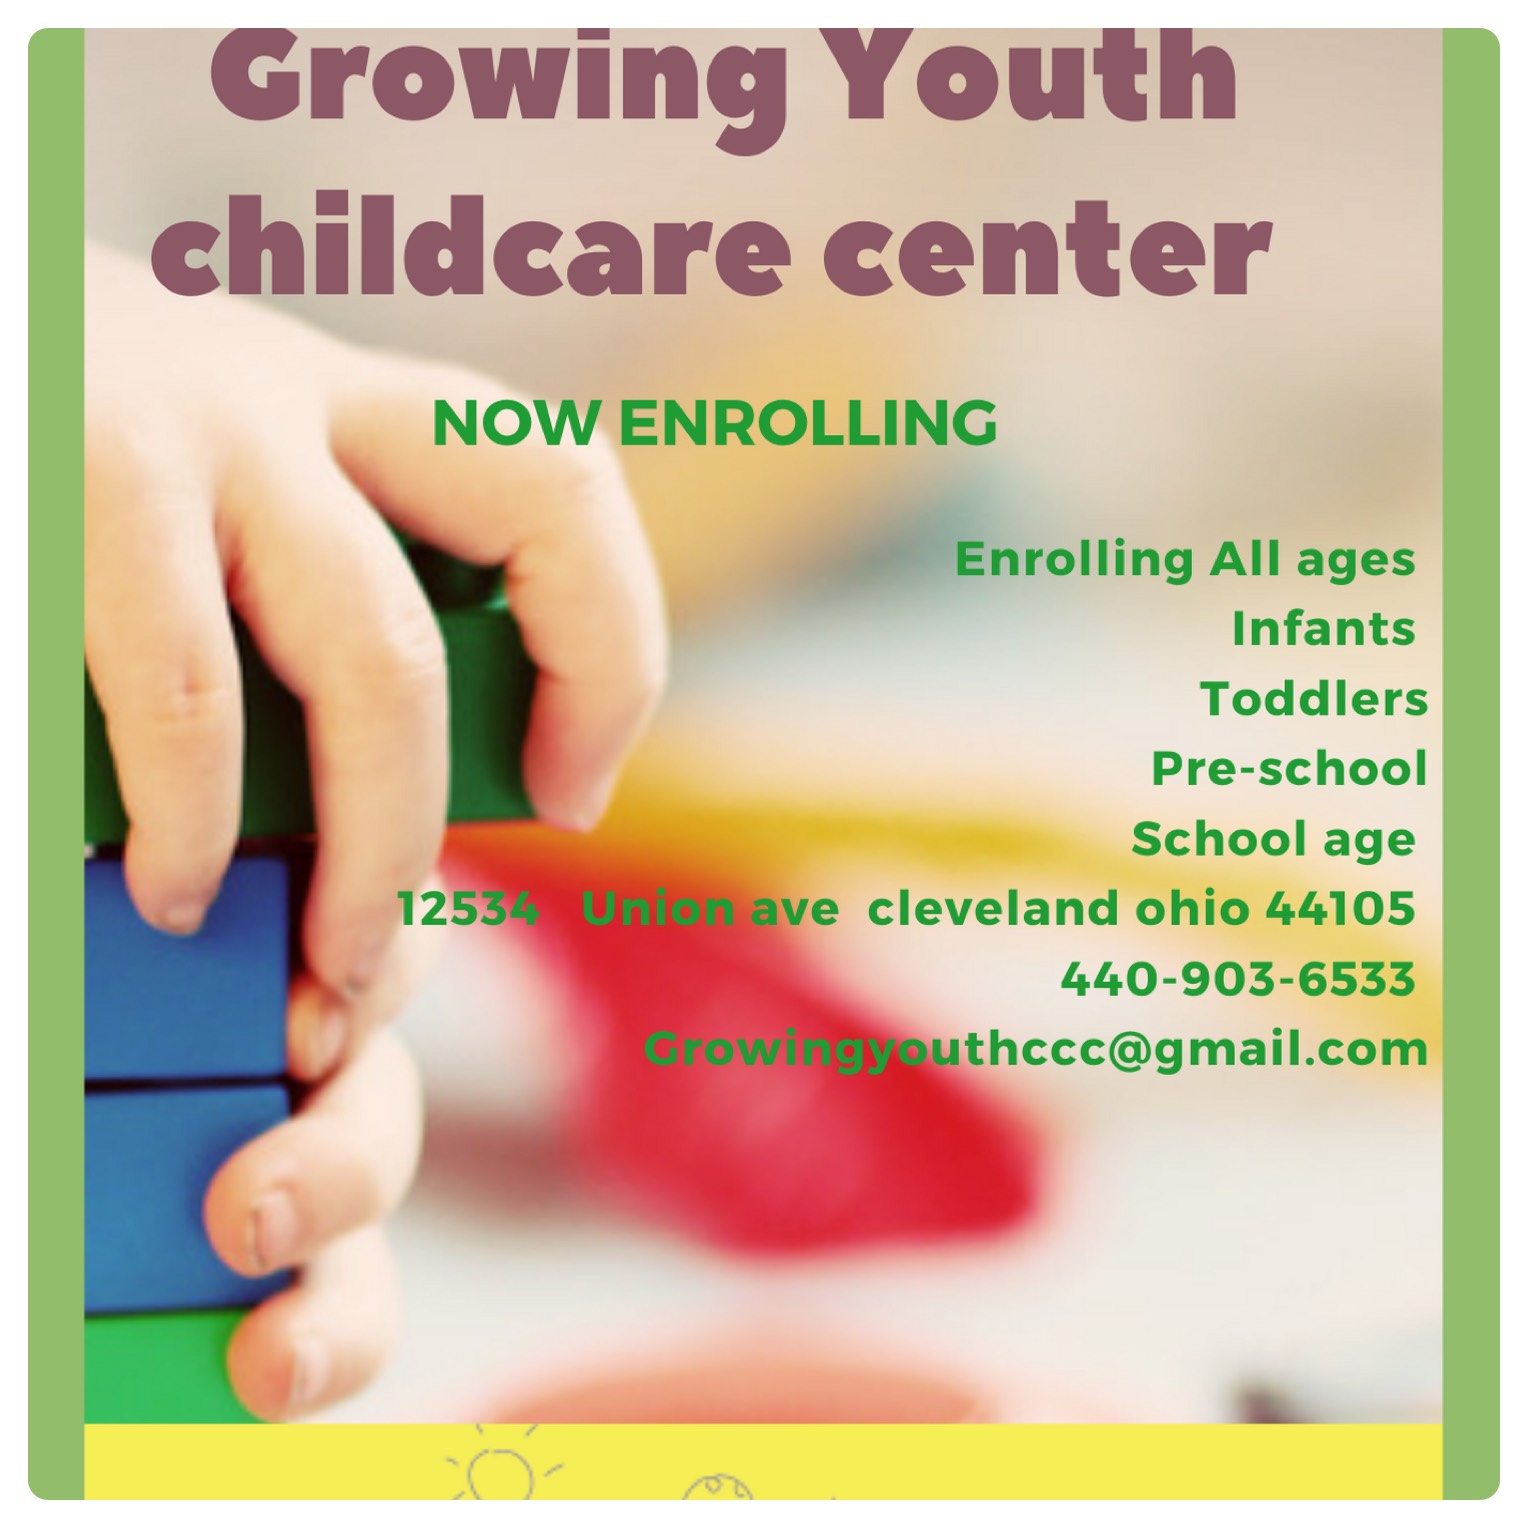 GROWING YOUTH CHILDCARE